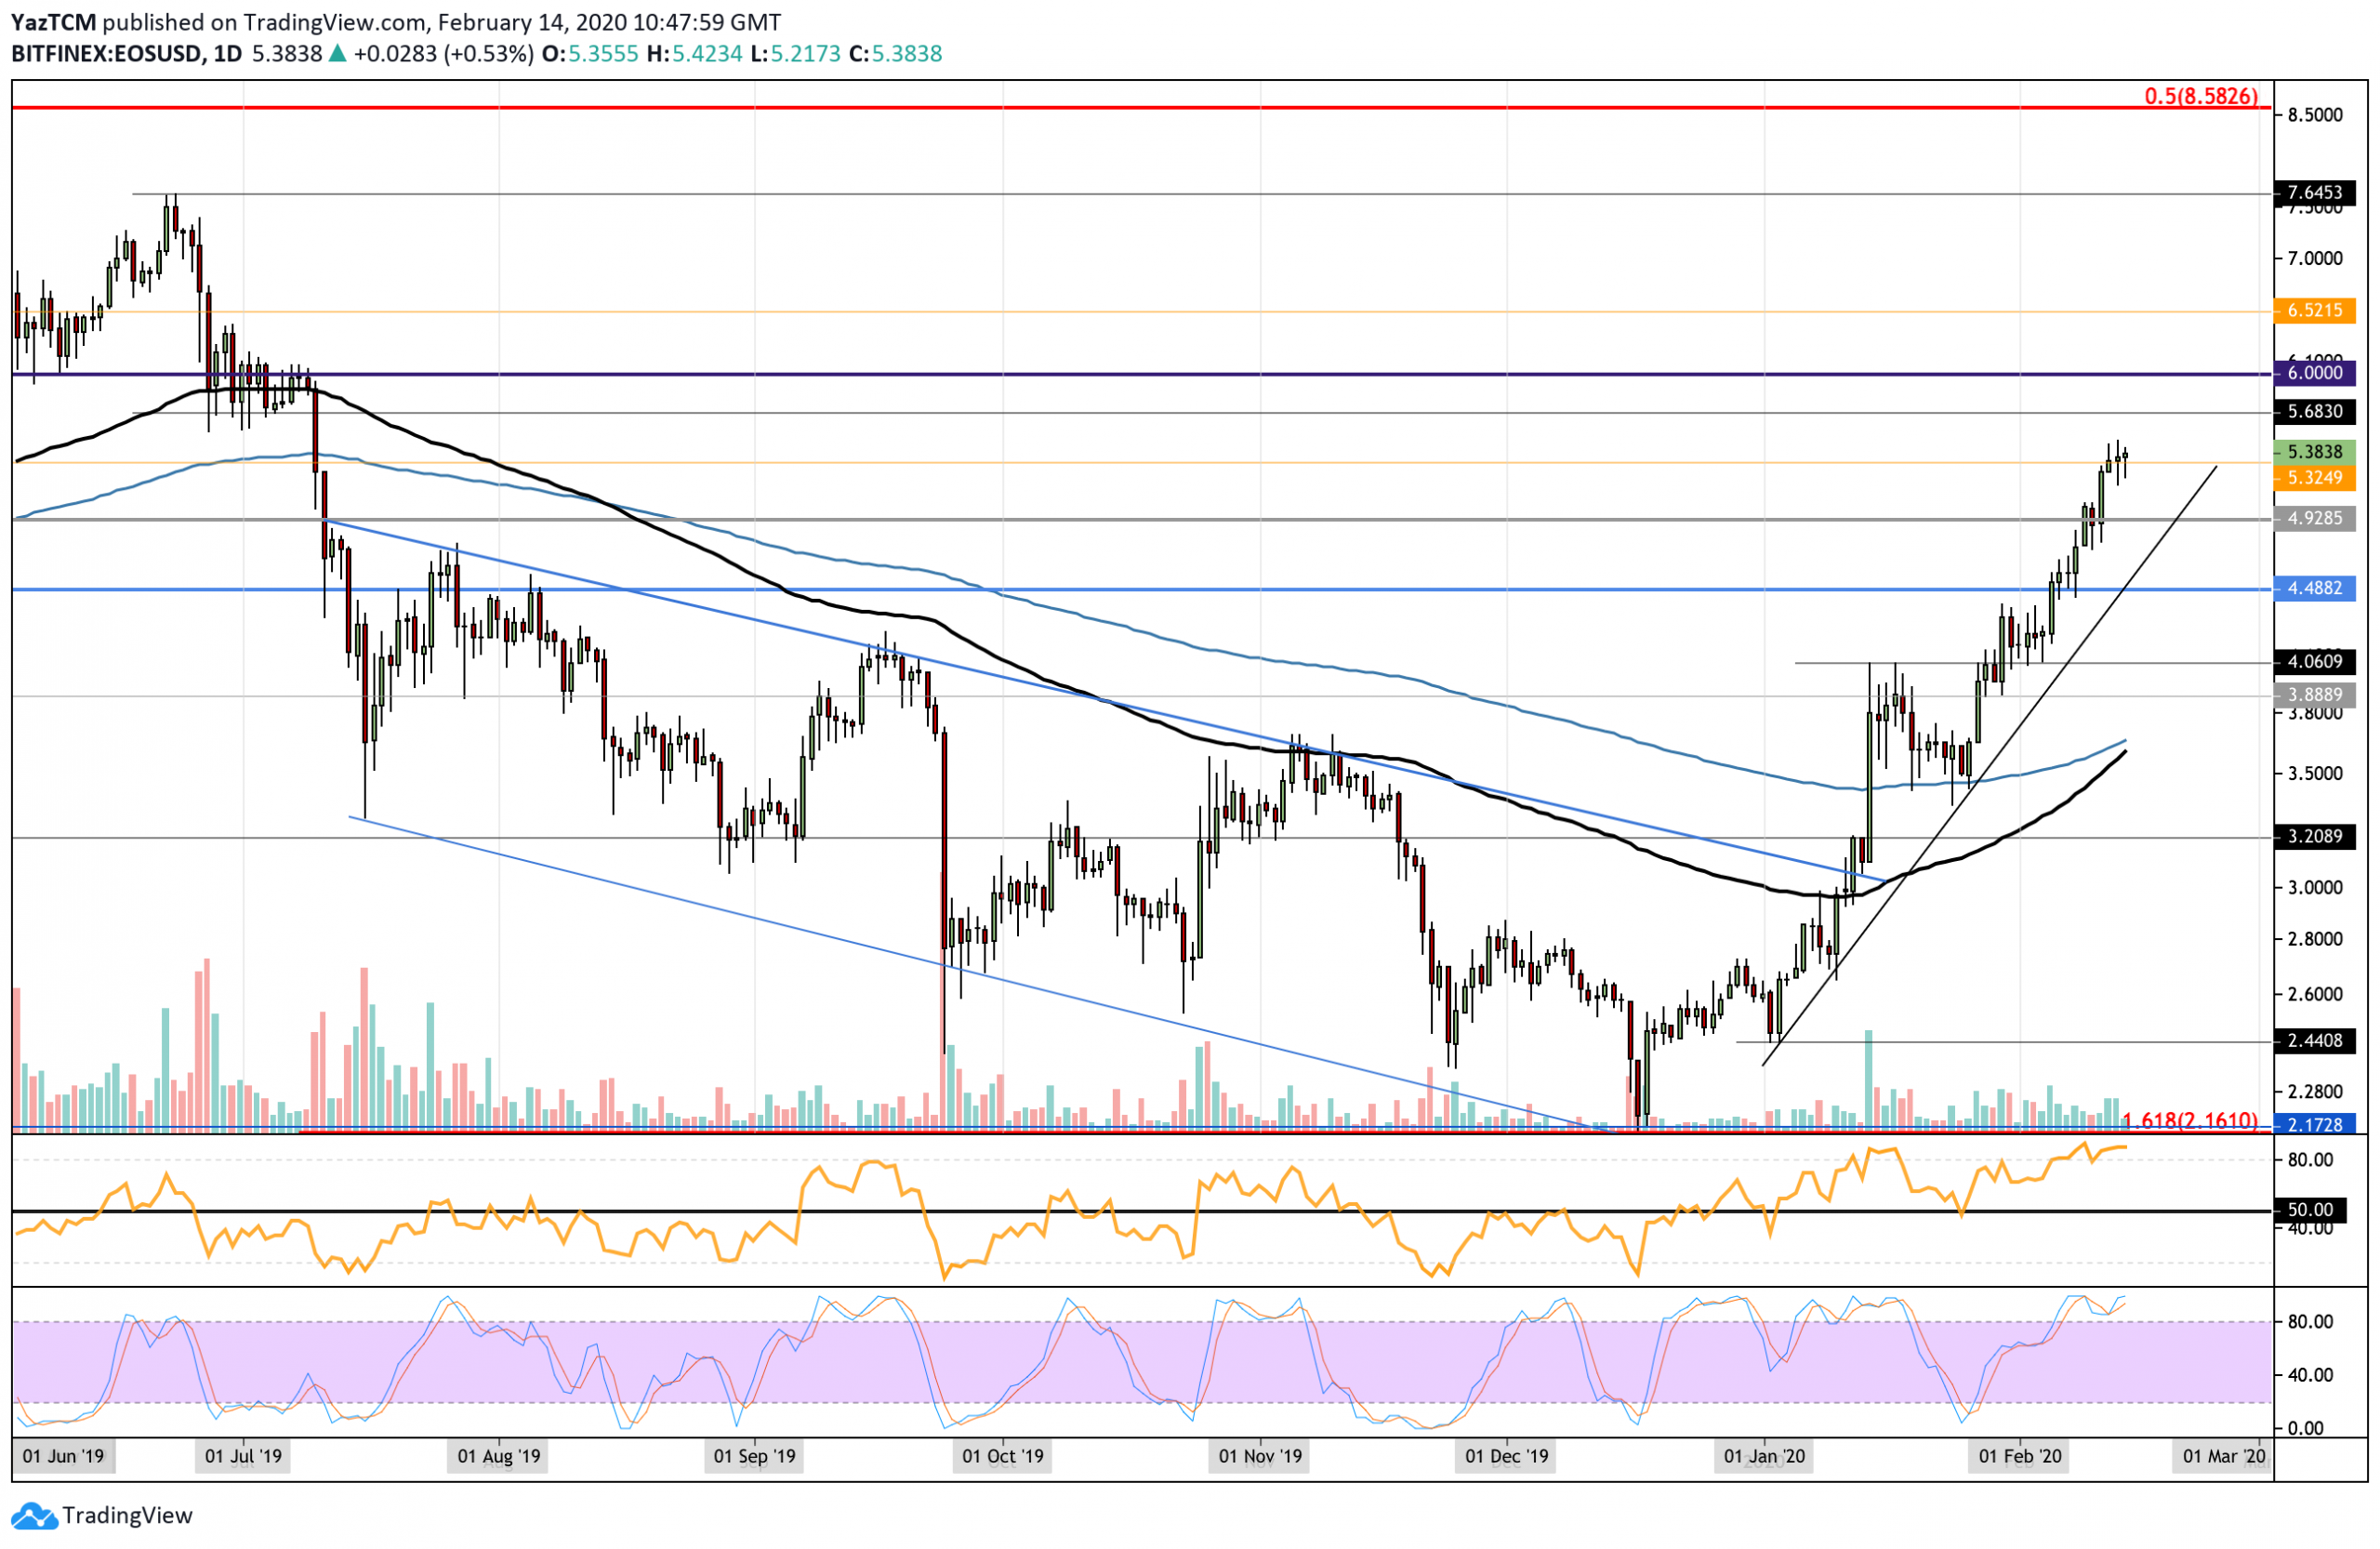 Crypto Price Analysis & Overview February 14th: Bitcoin, Ethereum, Ripple, Litecoin, and EOS.